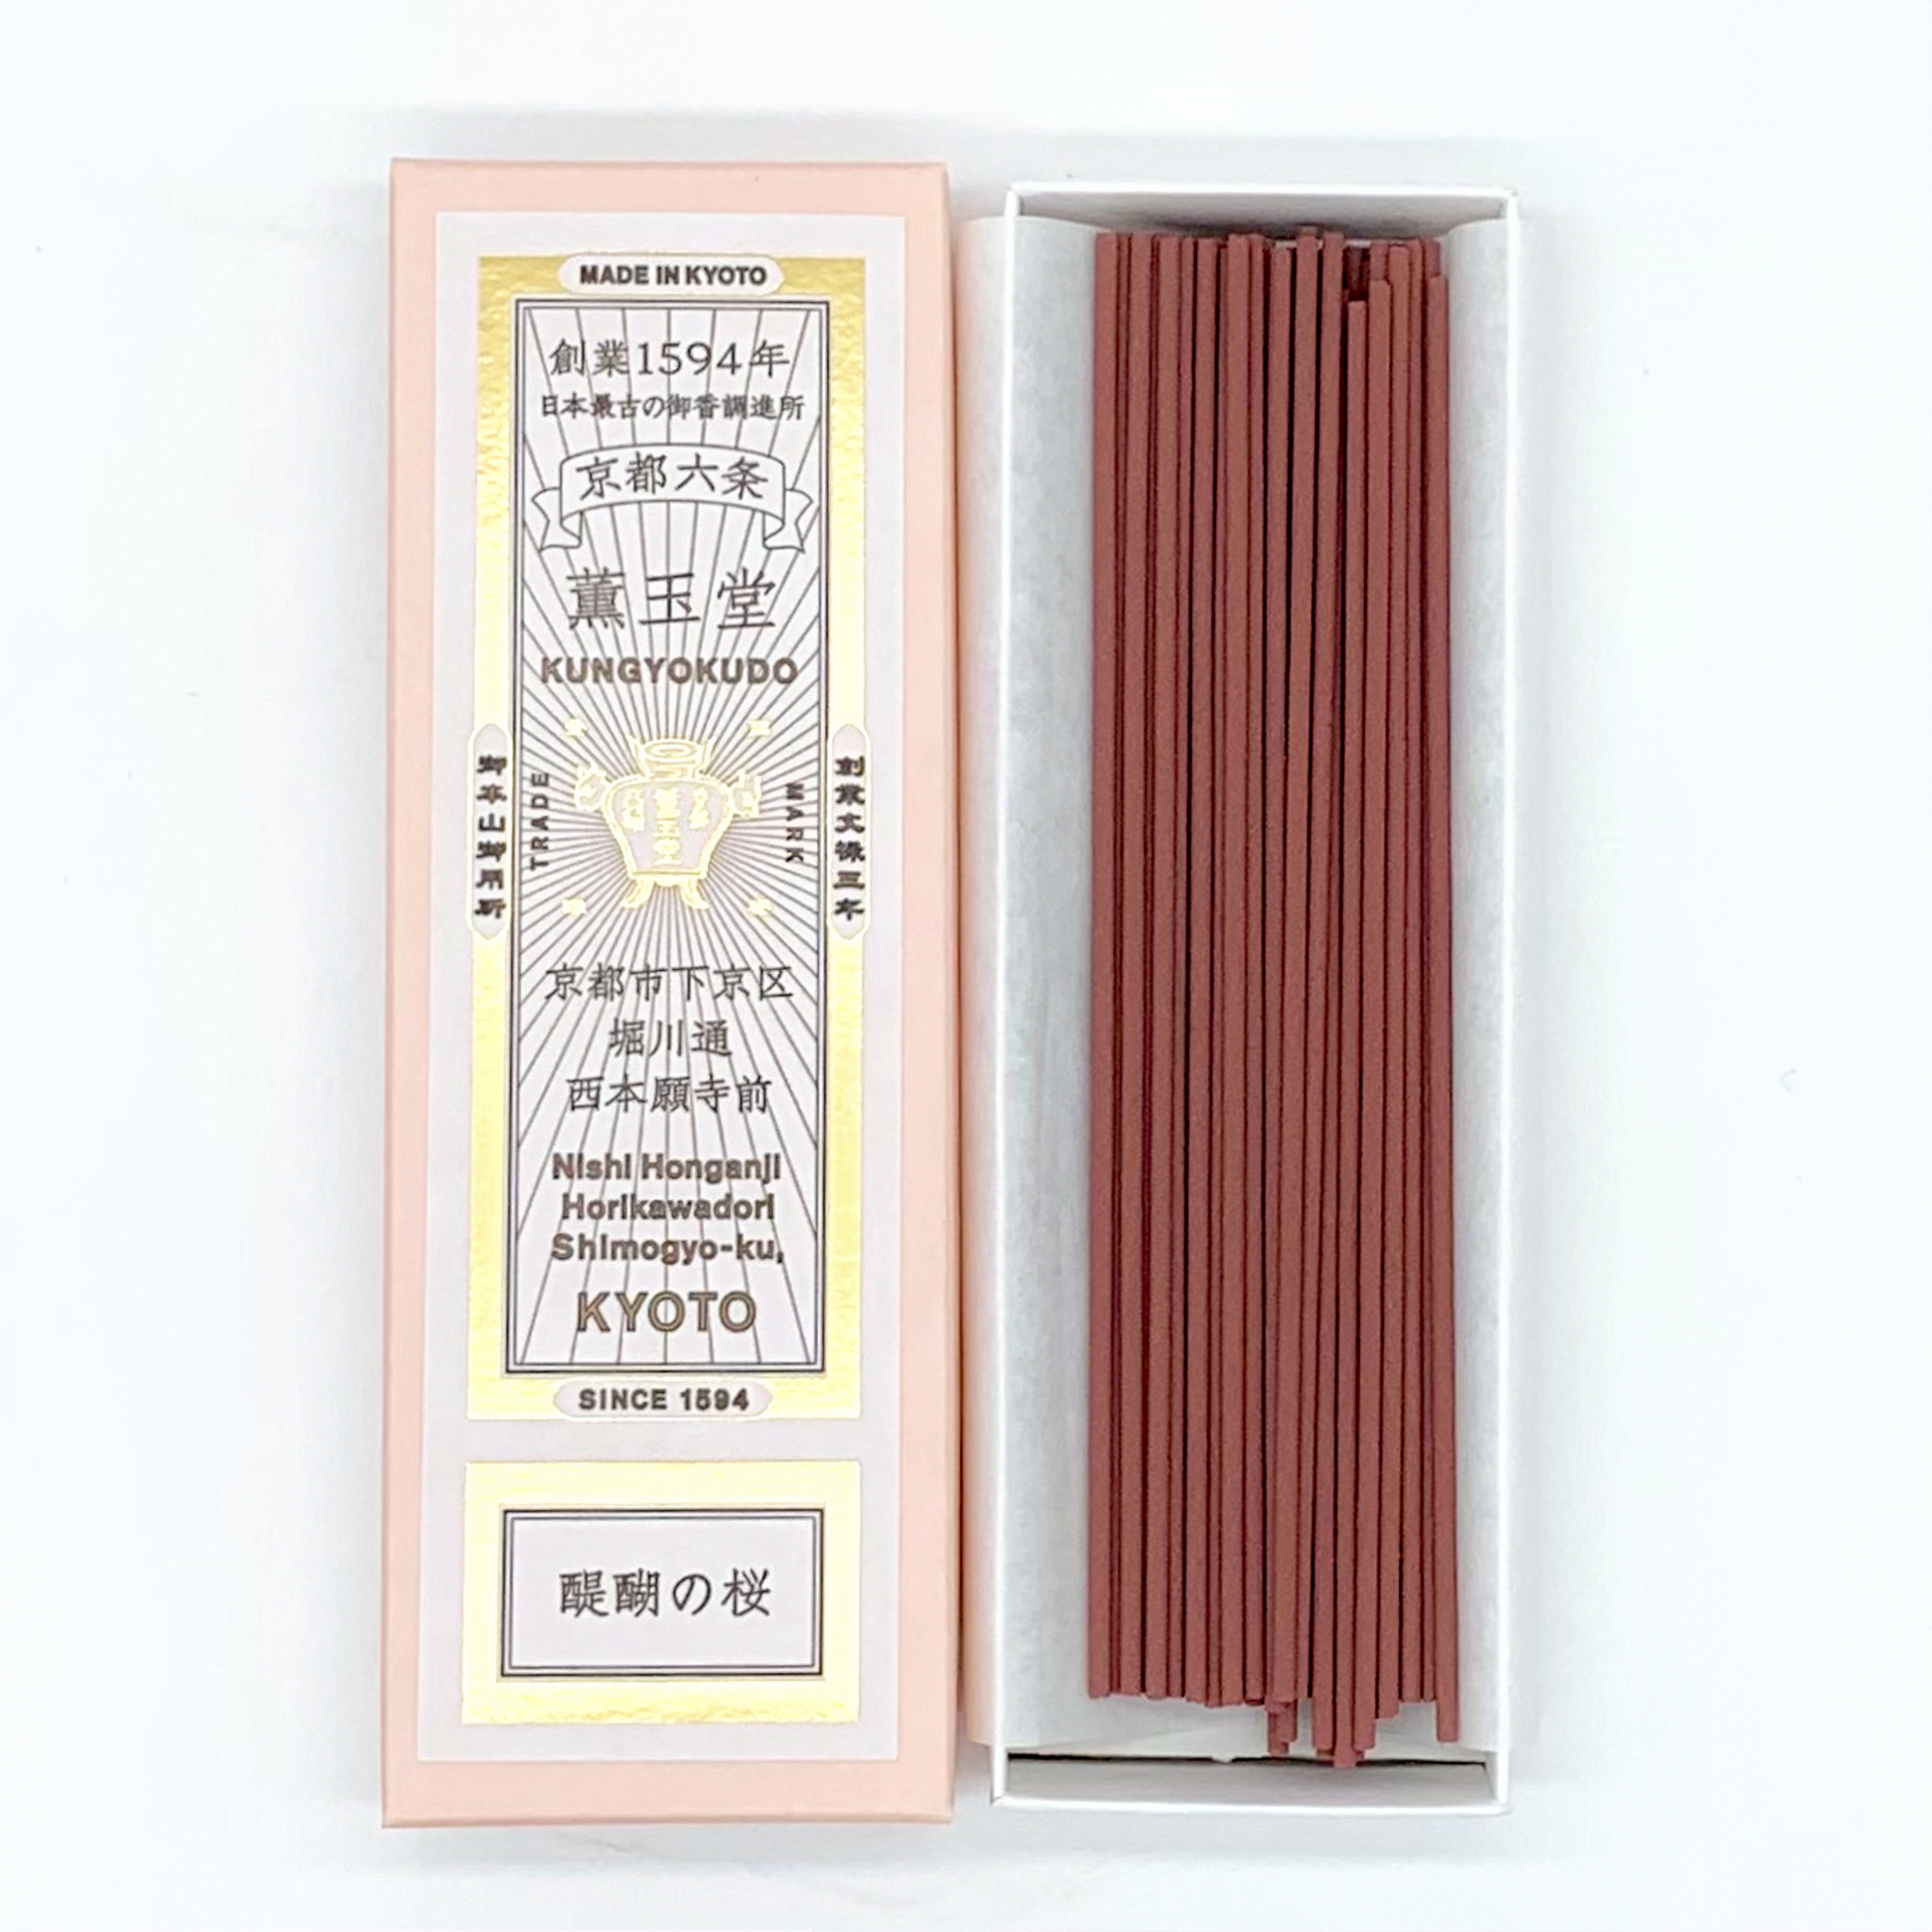 Kungyokudo Incense Sticks in Paper Box - Cherry Blossoms